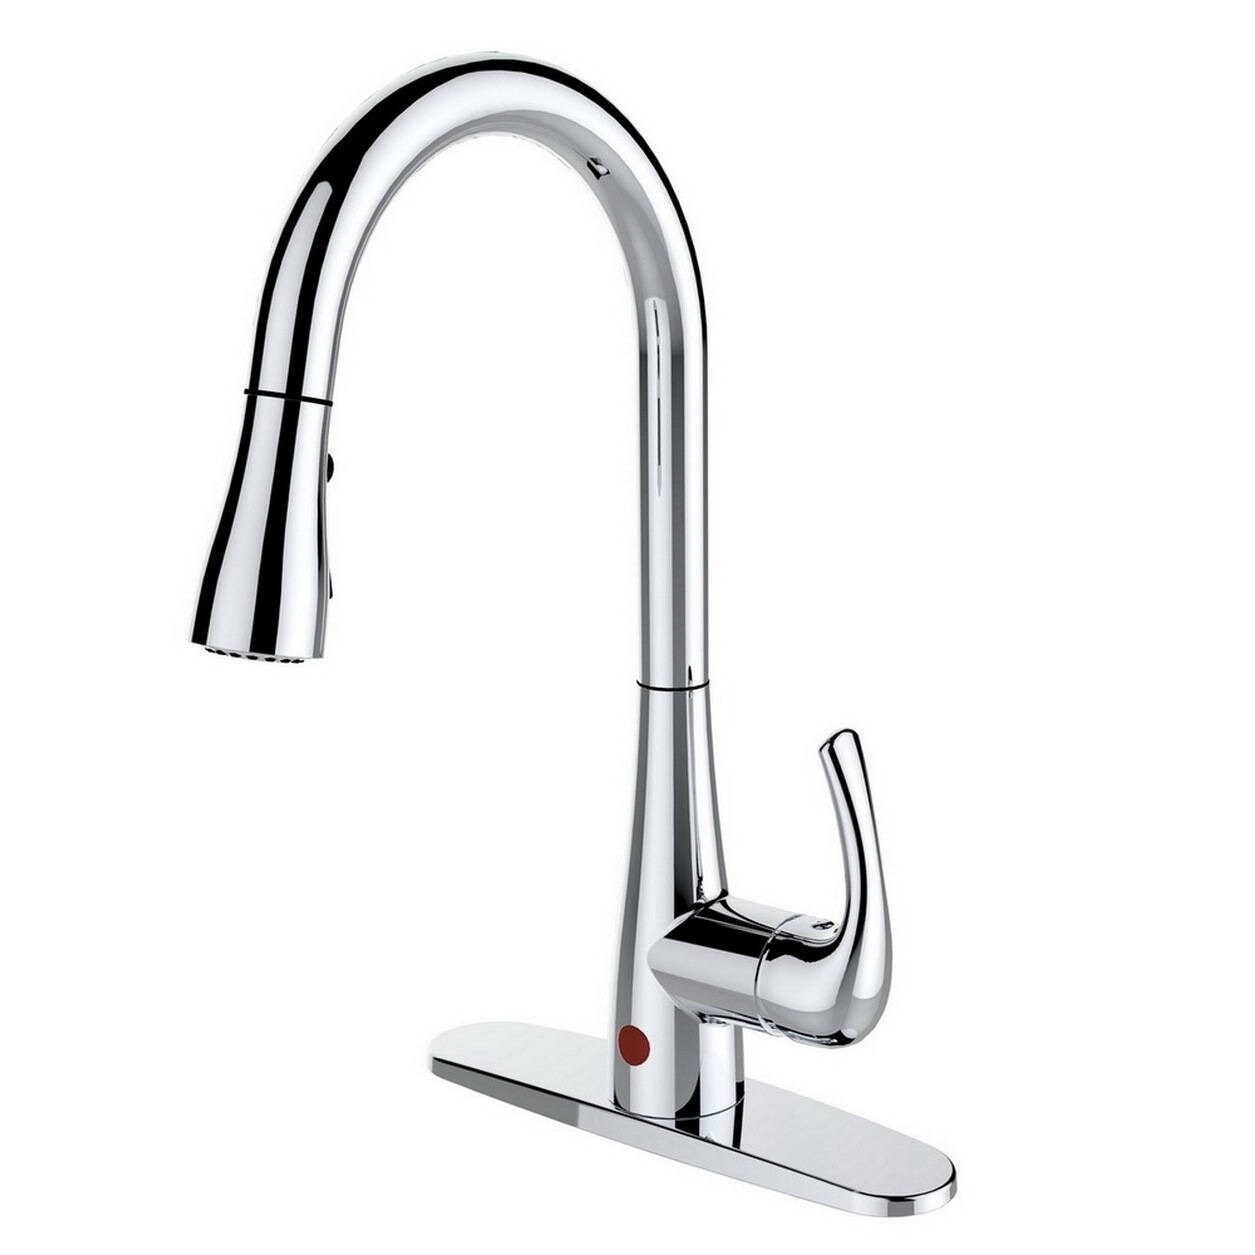 RUNFINE Single-Handle Pull-Down Sprayer With Hands-Free Kitchen Faucet Chrome - image 2 of 5